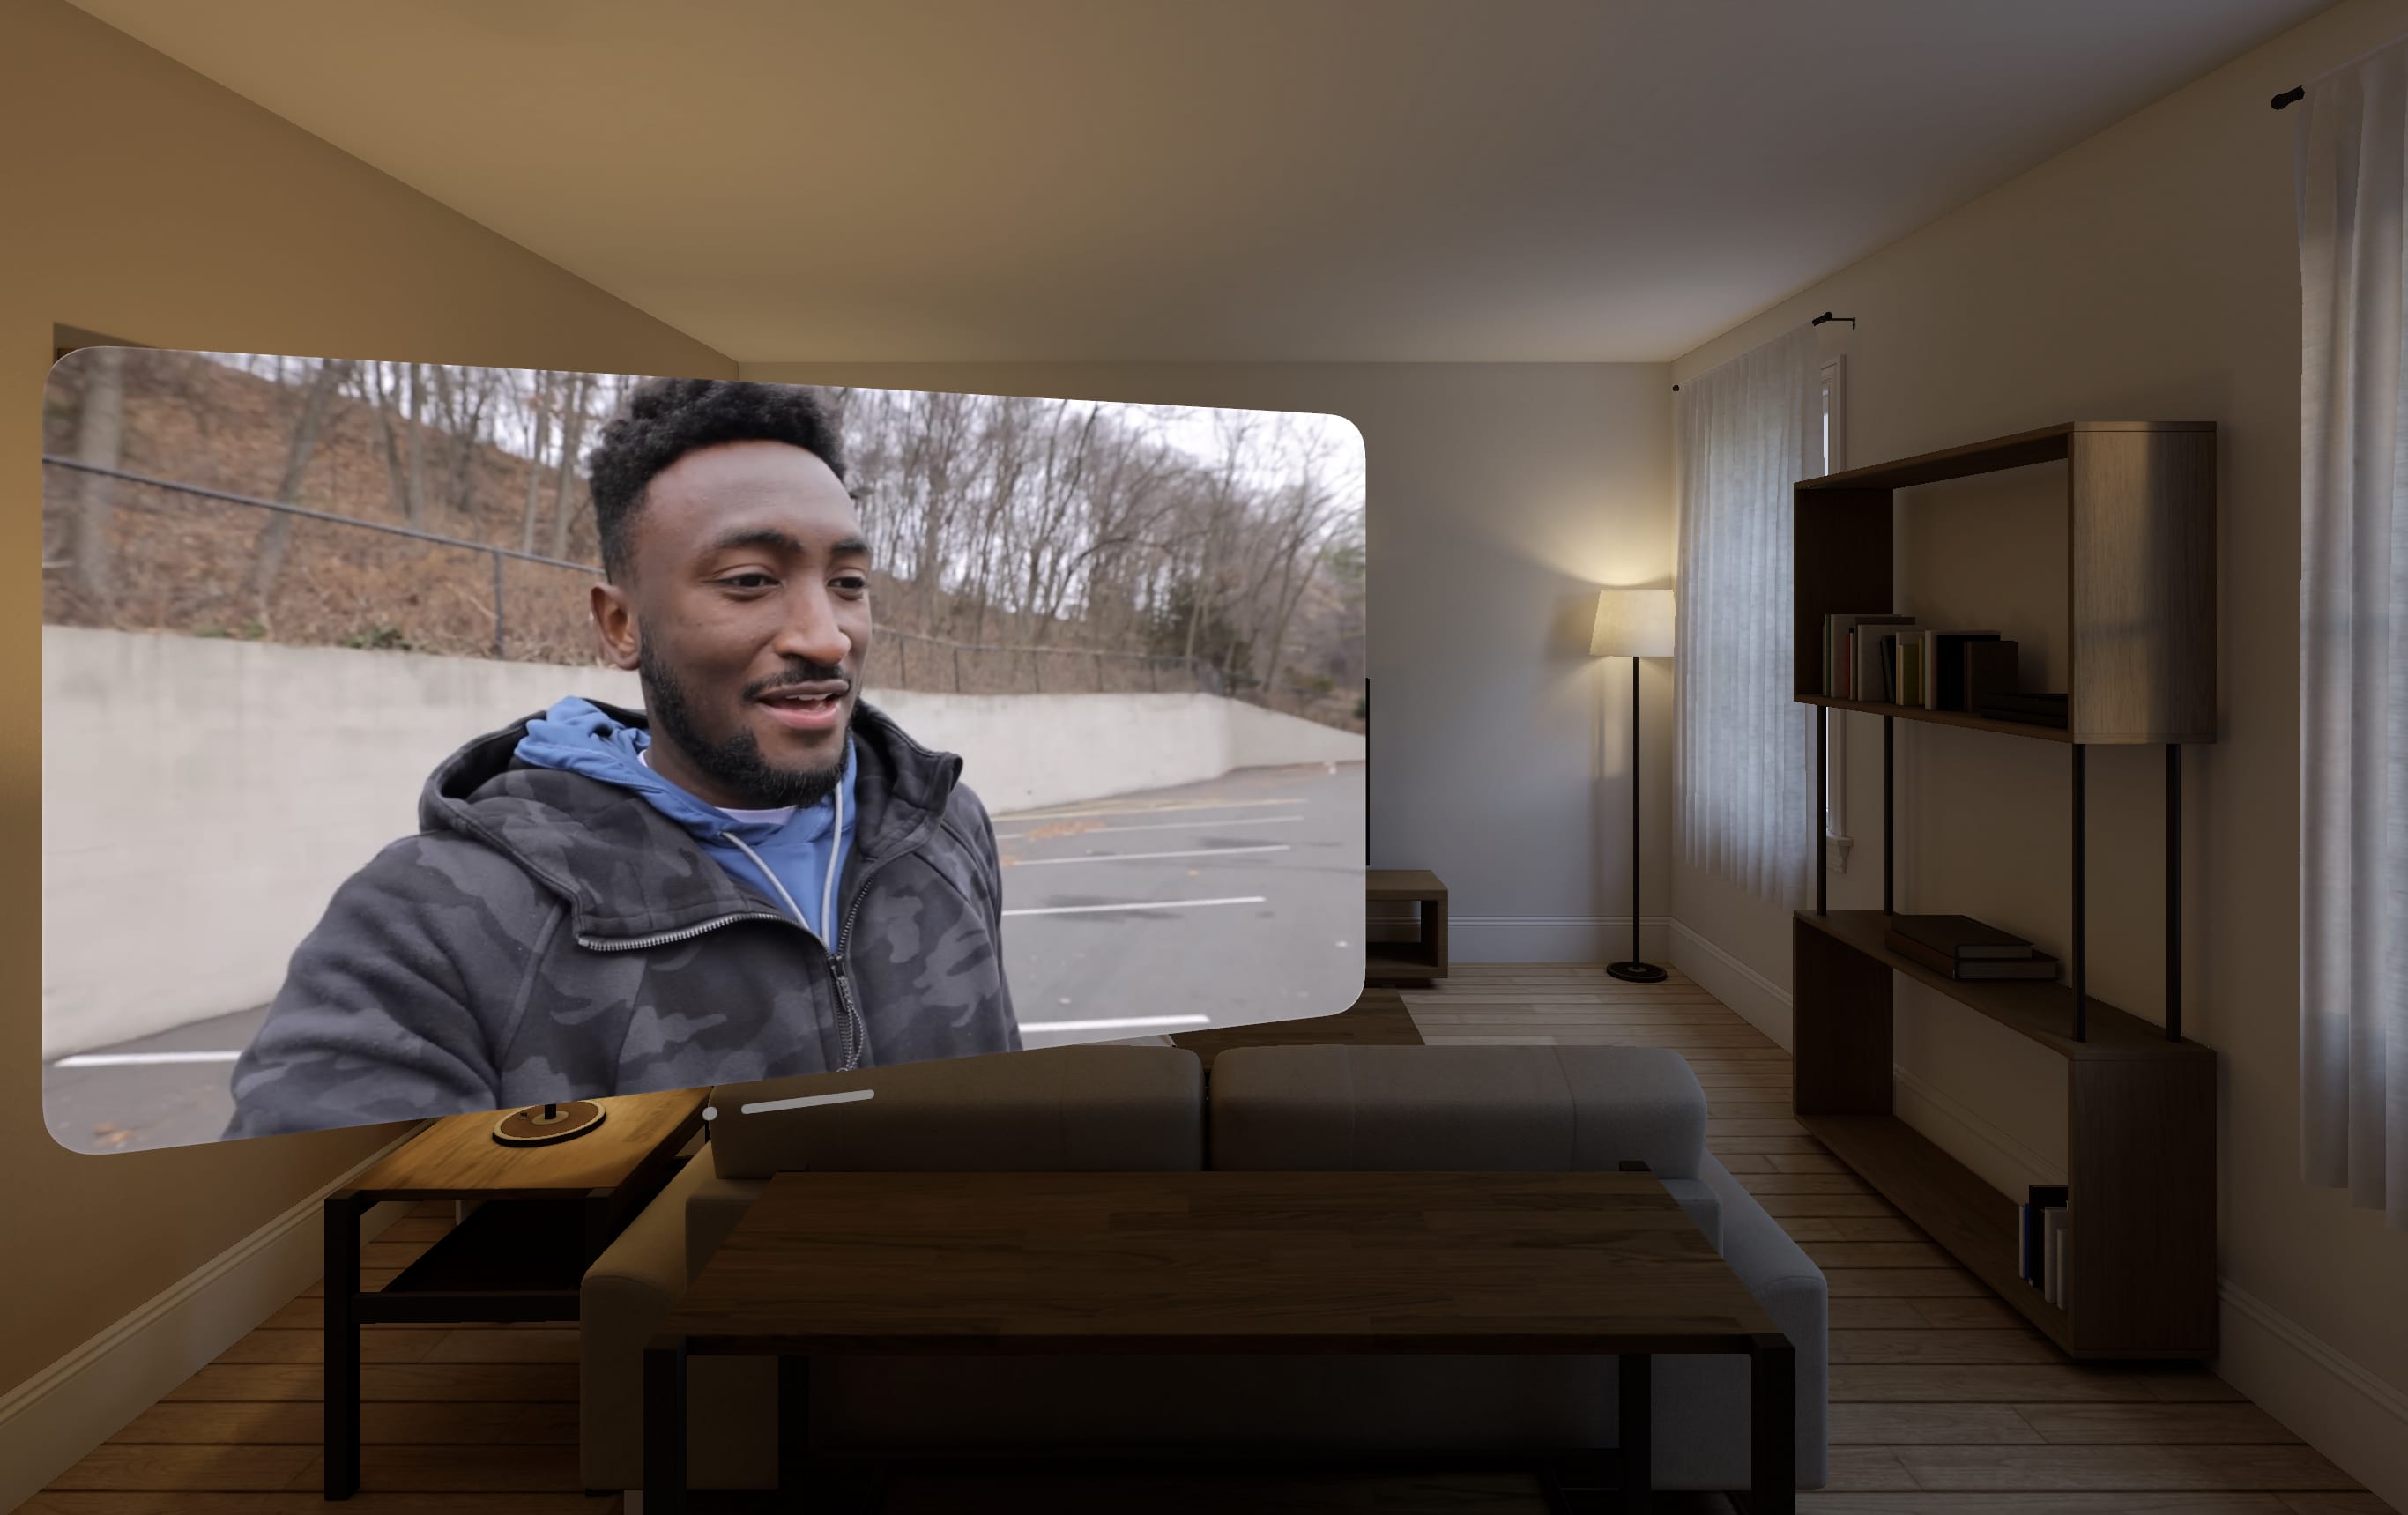 An MKBHD video that is positioned slightly off center in your peripheral vision